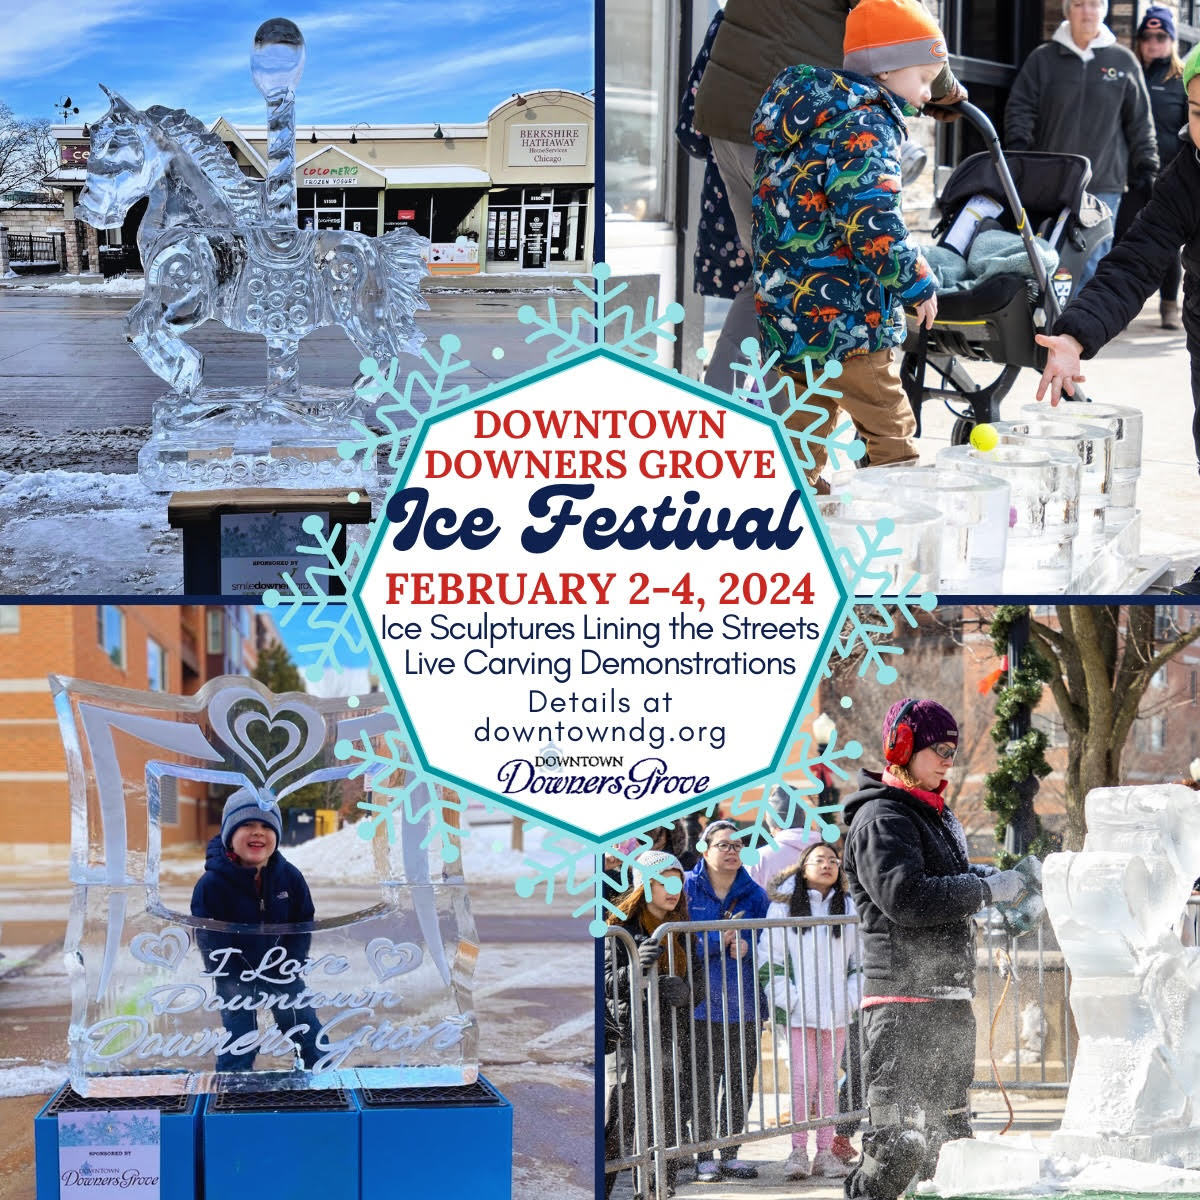 Downtown Downers Grove Ice Festival, February 2-4, 2024. Ice Sculptures Lining the Streets, Live Carving Demonstrations.